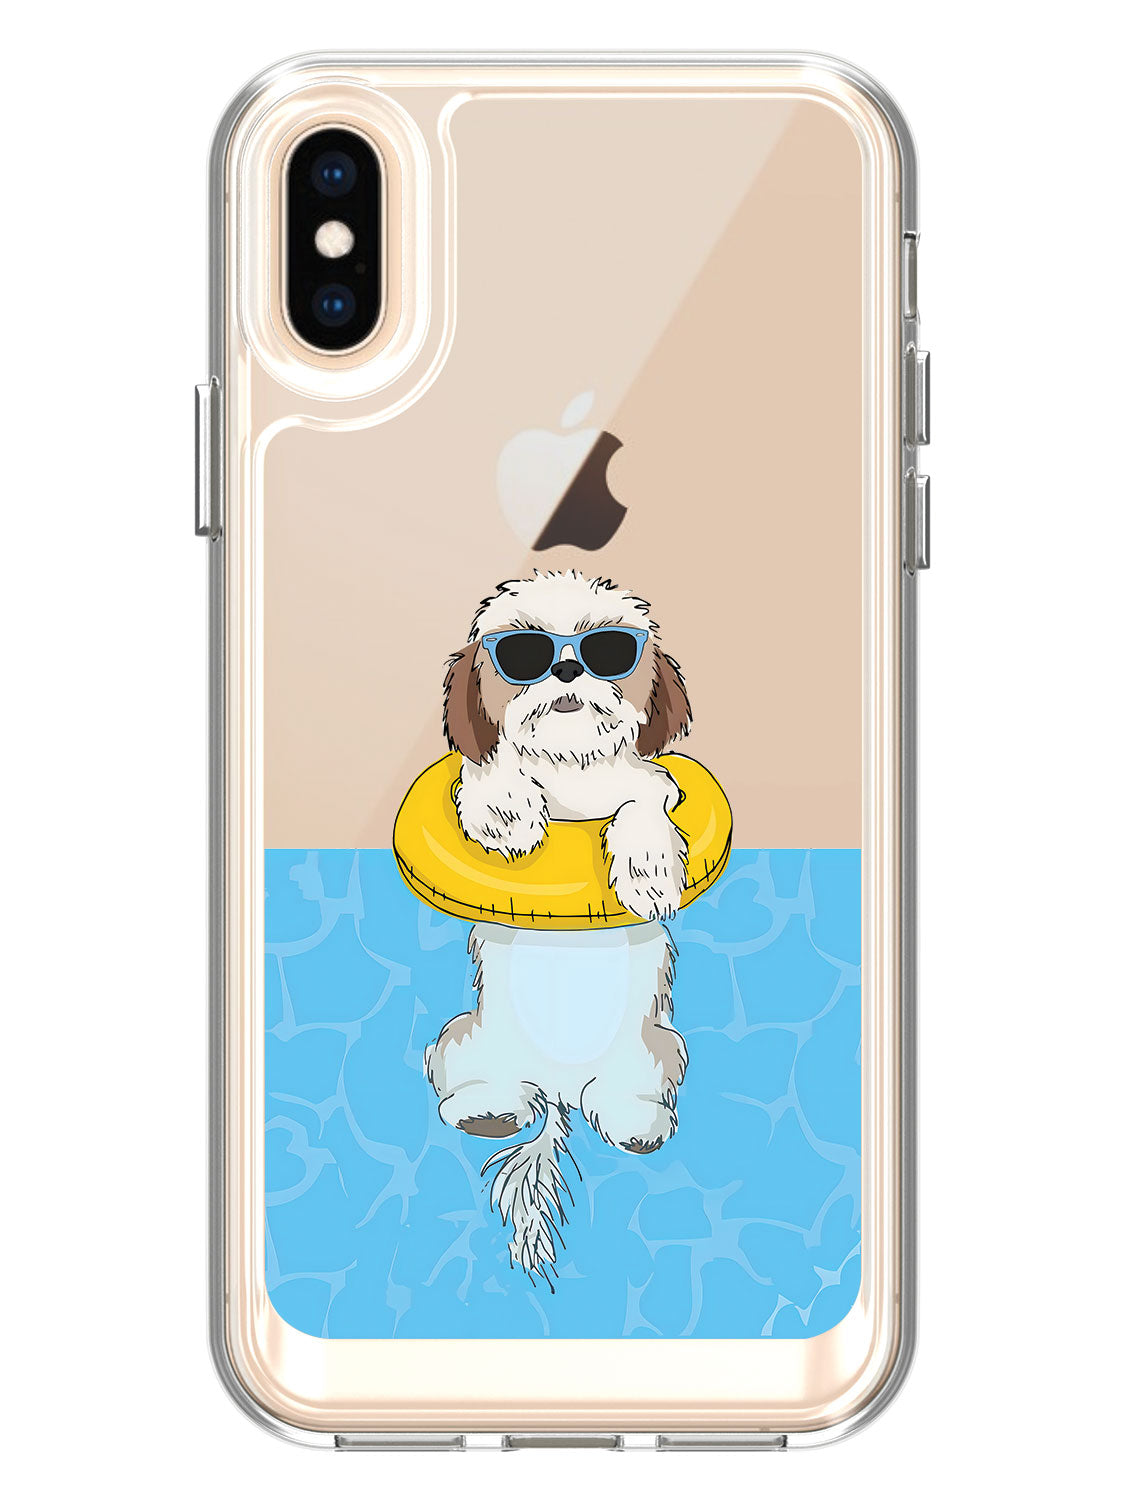 iphone x case cover , iphone x back cover , iphone x back cover hard case